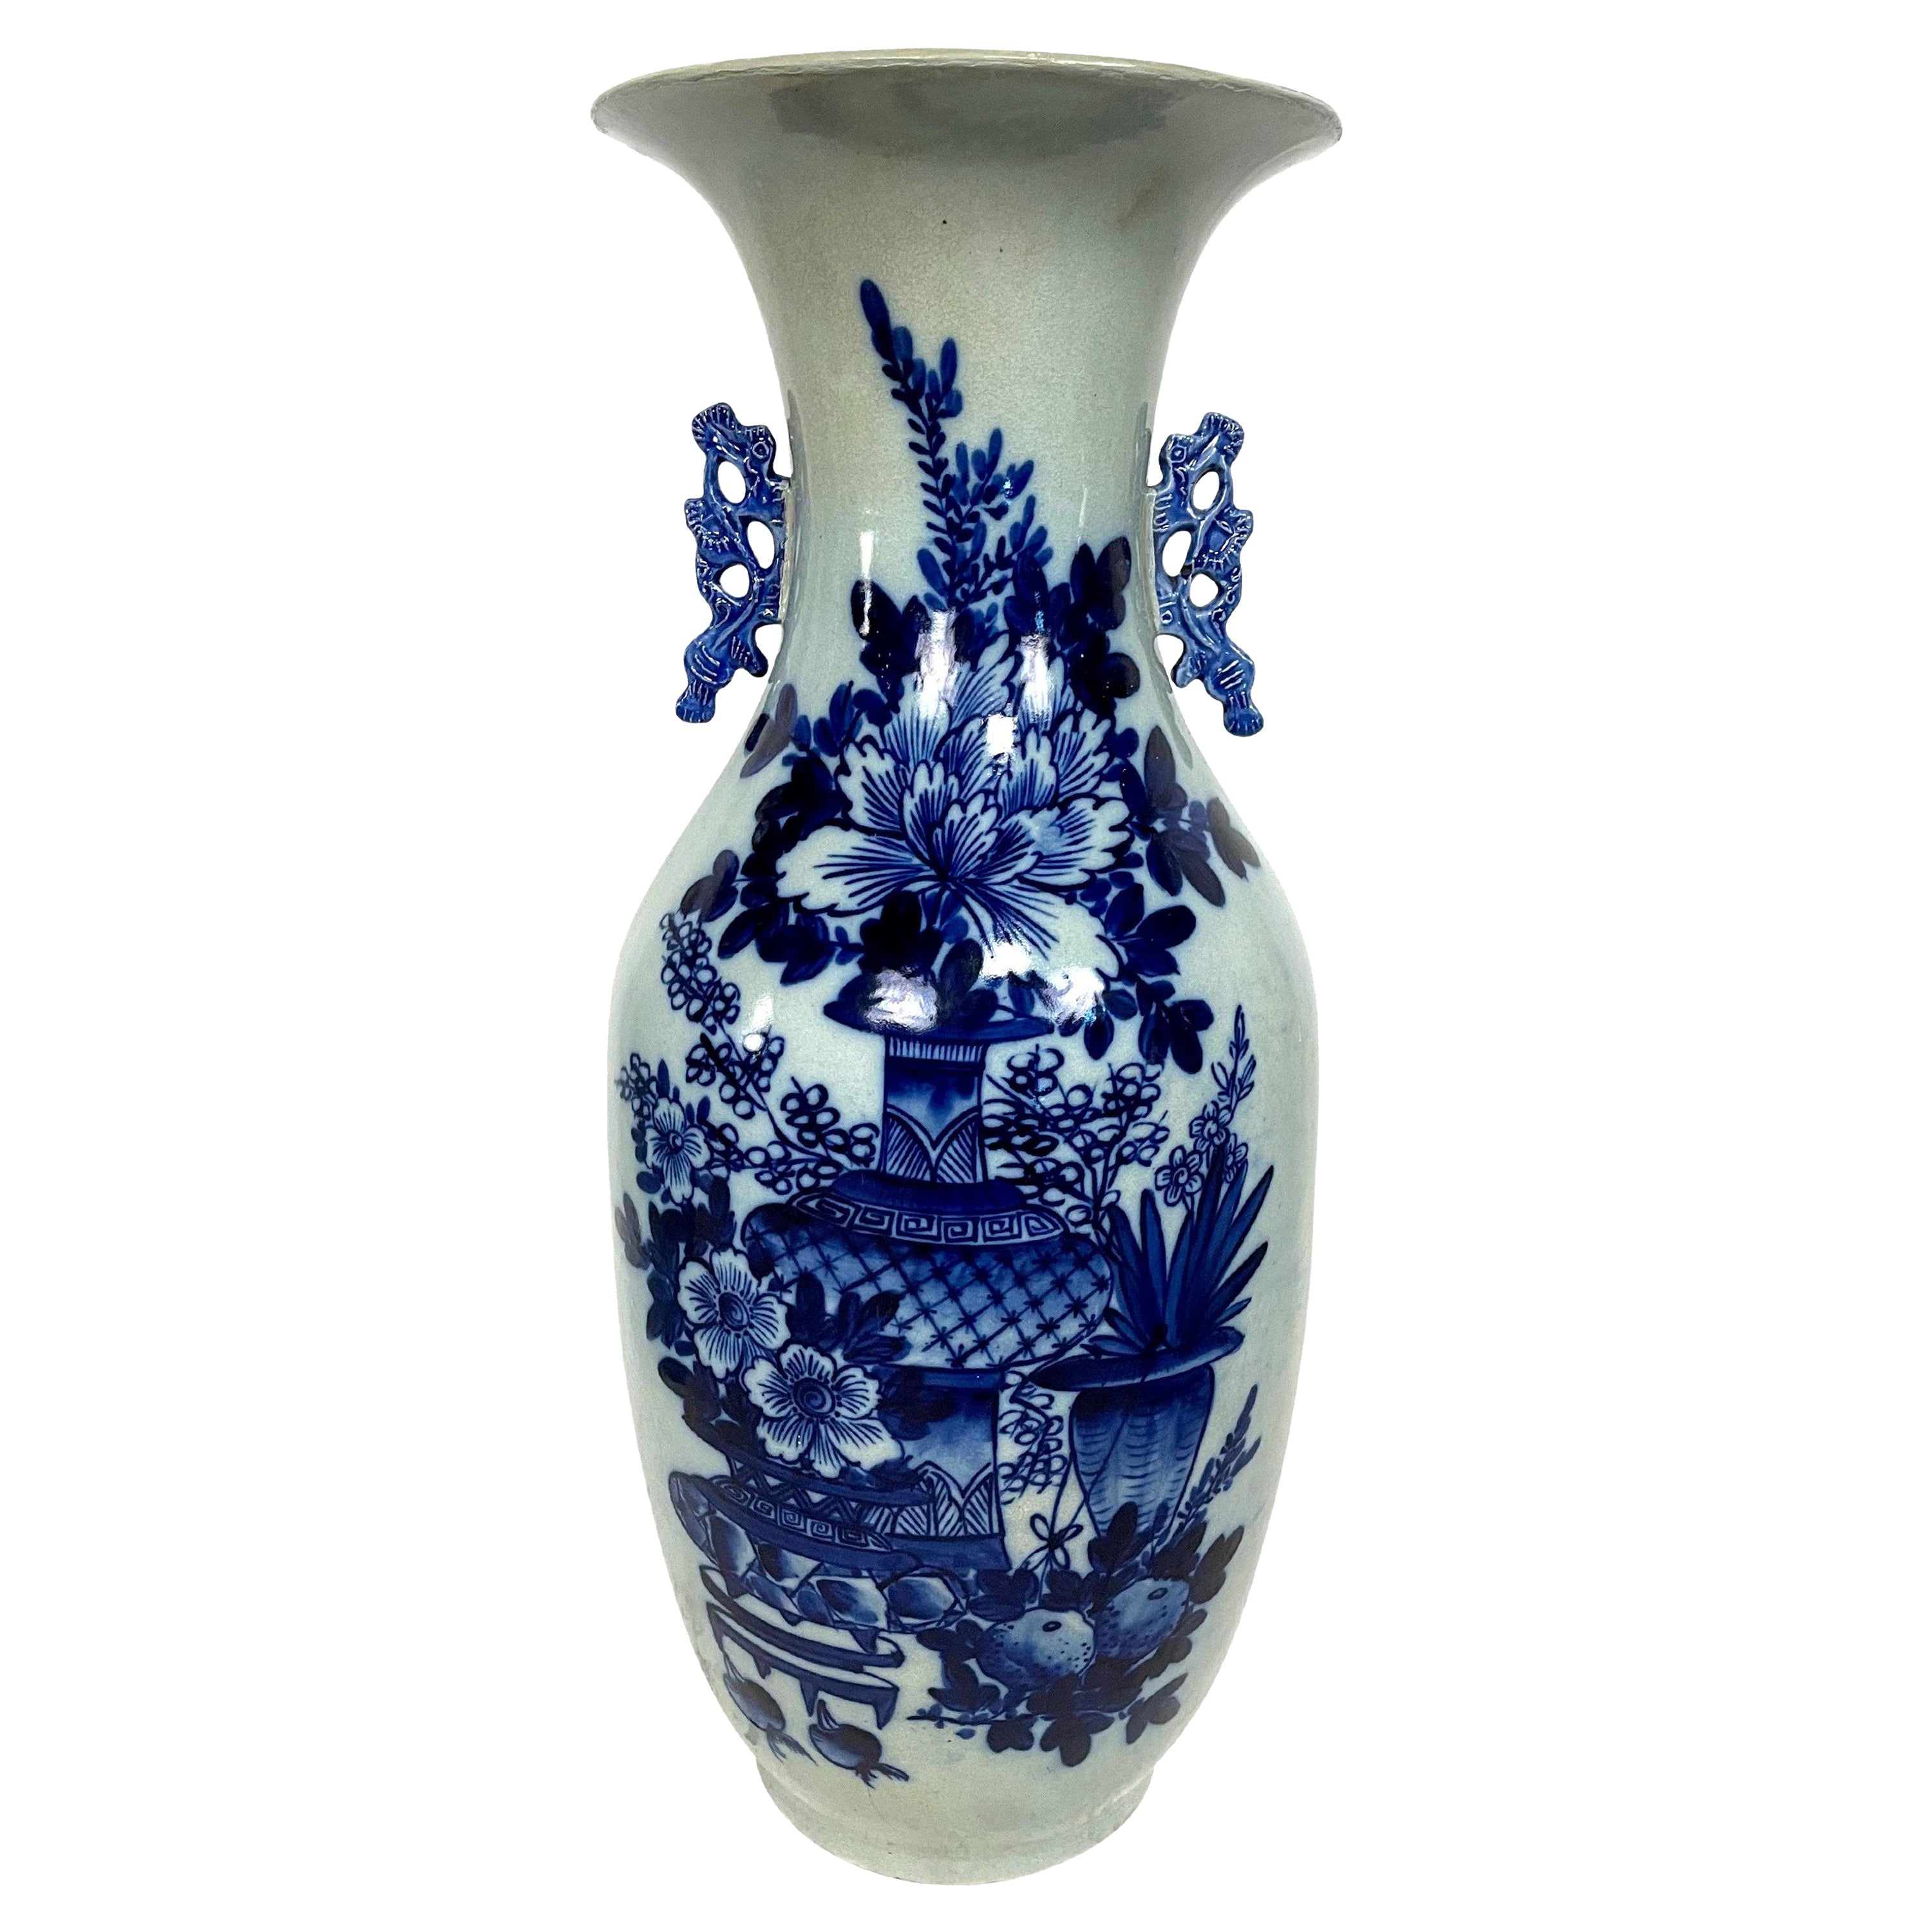 19th Century Chinese Blue and White Baluster Form Porcelain Urn or Vase